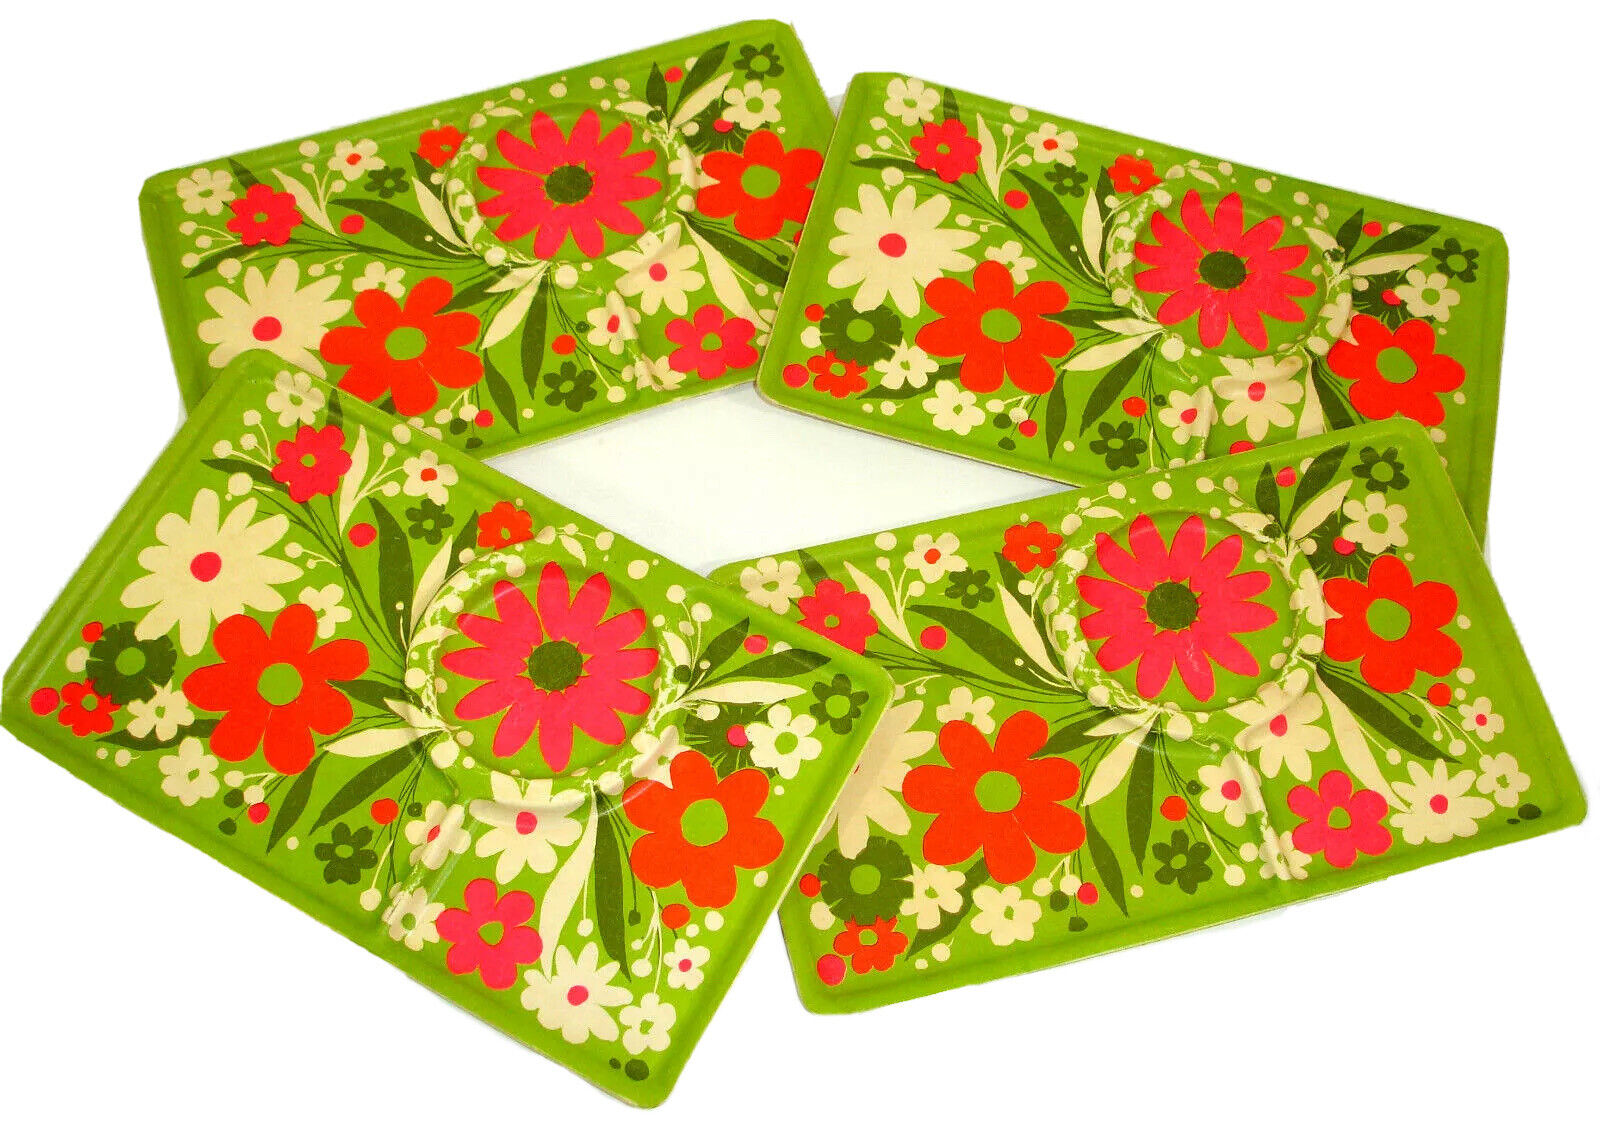 4 x Vintage 1960\'s 70\'s Pressed Cardboard Party Plates with Drink Holder Flowers